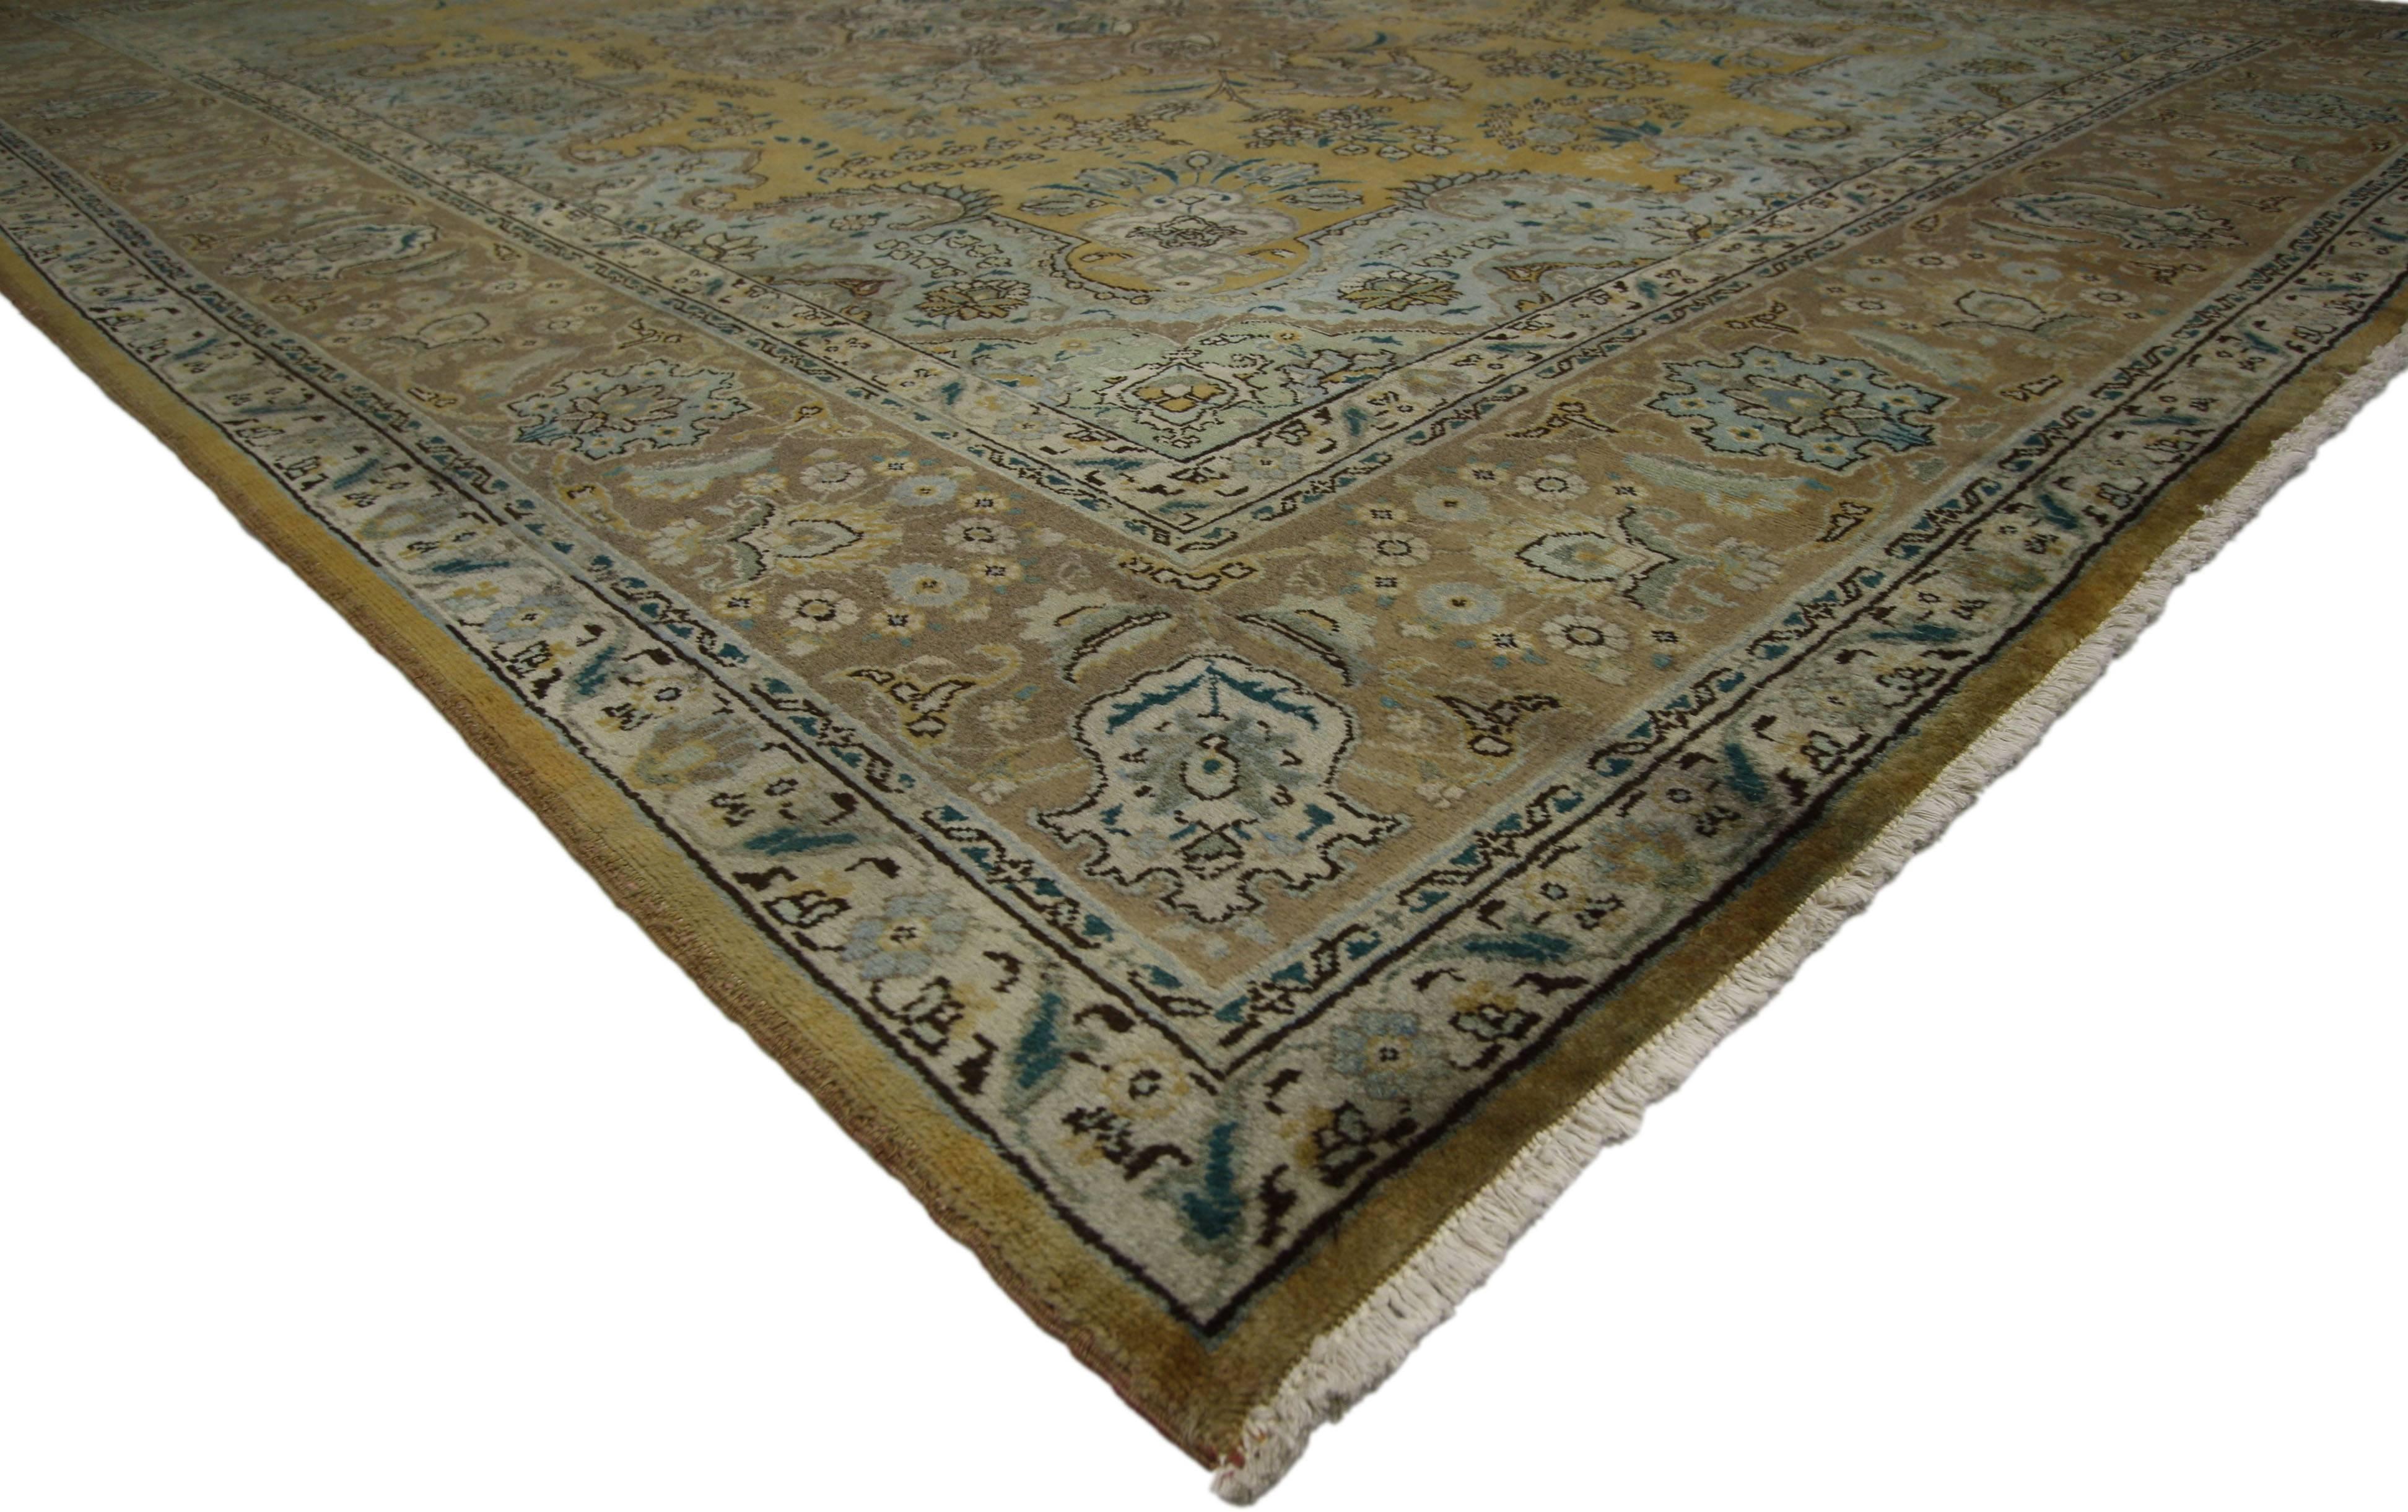 76441, vintage Persian Tabriz rug with traditional style. This hand-knotted wool vintage Persian Tabriz rug features a centre medallion and an allover pattern surrounded by a classic border creating a well-balanced and timeless design. This vintage